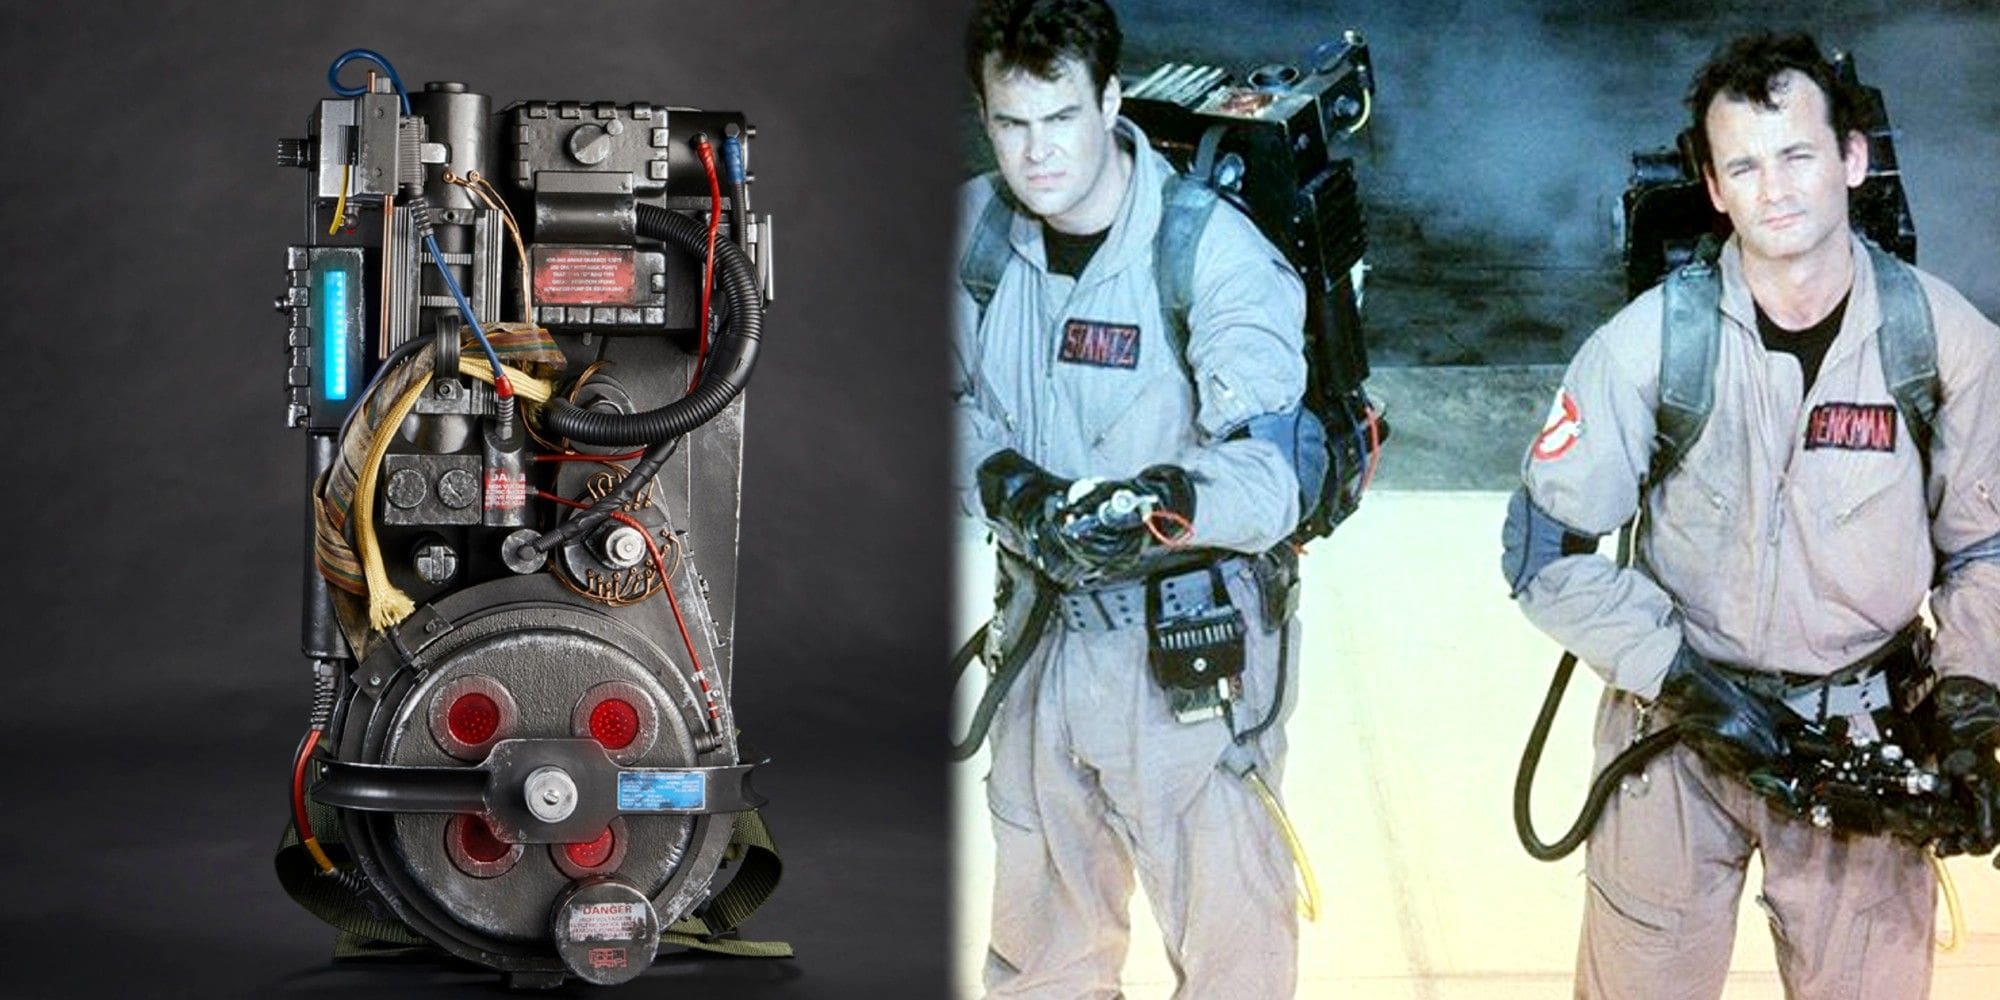 Los Angeles Declares June 8 as Ghostbusters Day to Celebrate the Iconic Film